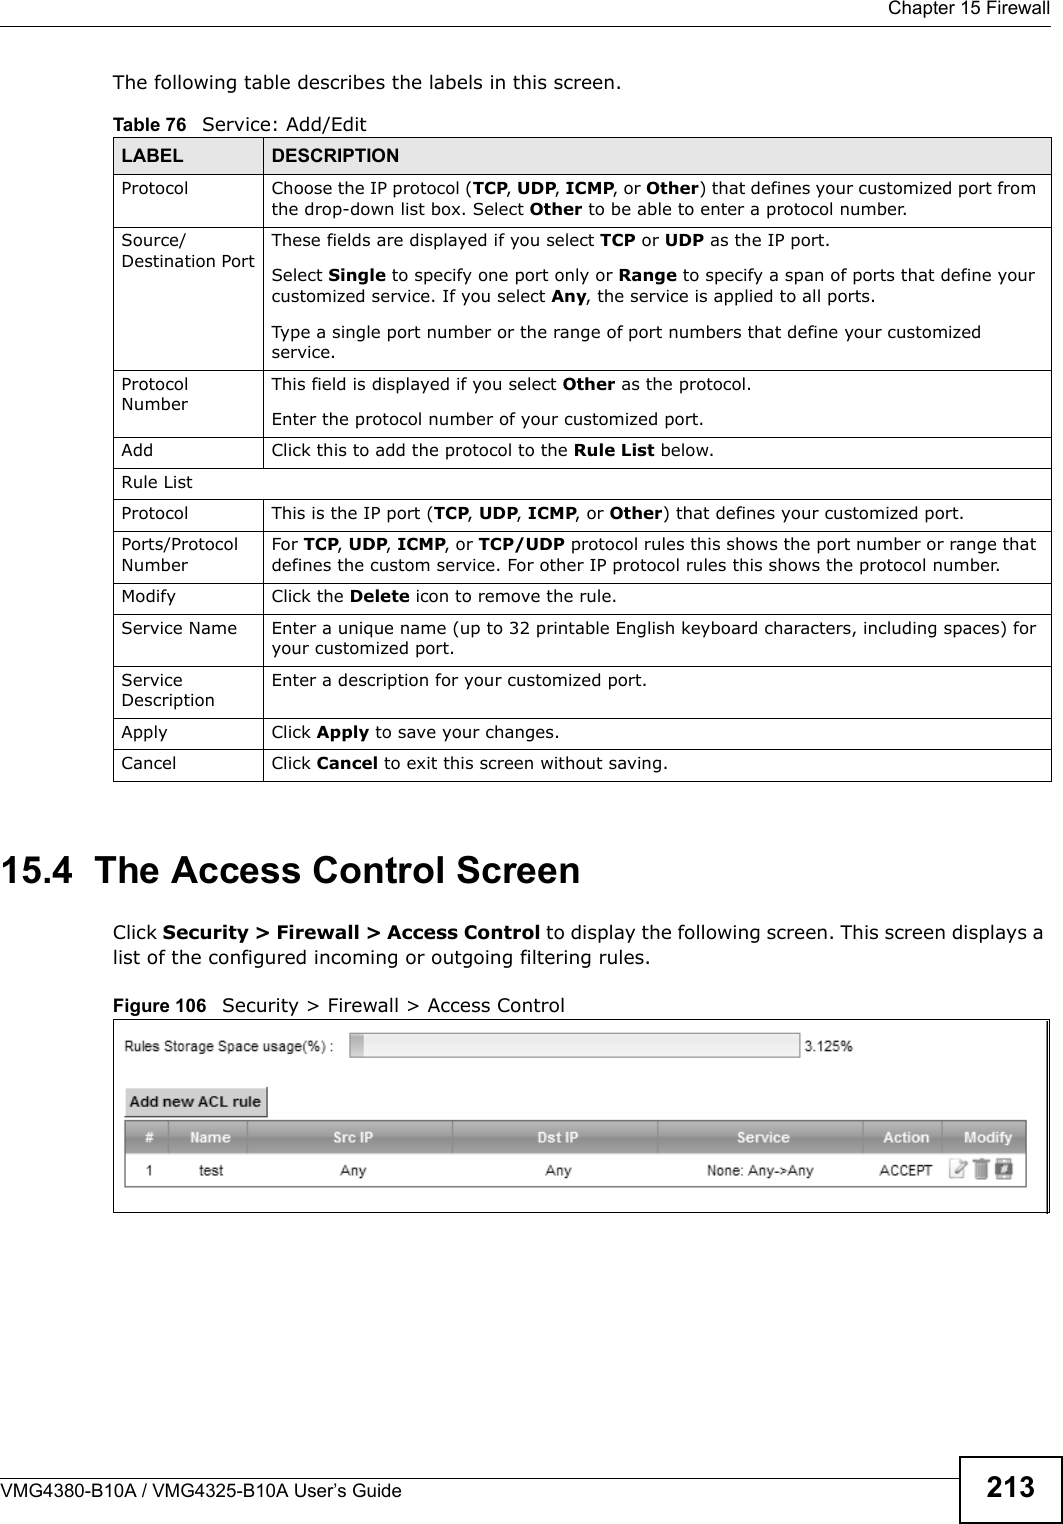  Chapter 15 FirewallVMG4380-B10A / VMG4325-B10A User’s Guide 213The following table describes the labels in this screen.15.4  The Access Control ScreenClick Security &gt; Firewall &gt; Access Control to display the following screen. This screen displays a list of the configured incoming or outgoing filtering rules. Figure 106   Security &gt; Firewall &gt; Access Control Table 76   Service: Add/EditLABEL DESCRIPTIONProtocol Choose the IP protocol (TCP, UDP, ICMP, or Other) that defines your customized port from the drop-down list box. Select Other to be able to enter a protocol number.Source/Destination PortThese fields are displayed if you select TCP or UDP as the IP port. Select Single to specify one port only or Range to specify a span of ports that define your customized service. If you select Any, the service is applied to all ports.Type a single port number or the range of port numbers that define your customized service.Protocol NumberThis field is displayed if you select Other as the protocol.Enter the protocol number of your customized port. Add Click this to add the protocol to the Rule List below.Rule ListProtocol This is the IP port (TCP, UDP, ICMP, or Other) that defines your customized port.Ports/ProtocolNumberFor TCP, UDP, ICMP, or TCP/UDP protocol rules this shows the port number or range thatdefines the custom service. For other IP protocol rules this shows the protocol number. Modify Click the Delete icon to remove the rule.Service Name Enter a unique name (up to 32 printable English keyboard characters, including spaces) foryour customized port.ServiceDescriptionEnter a description for your customized port.Apply Click Apply to save your changes.Cancel Click Cancel to exit this screen without saving.